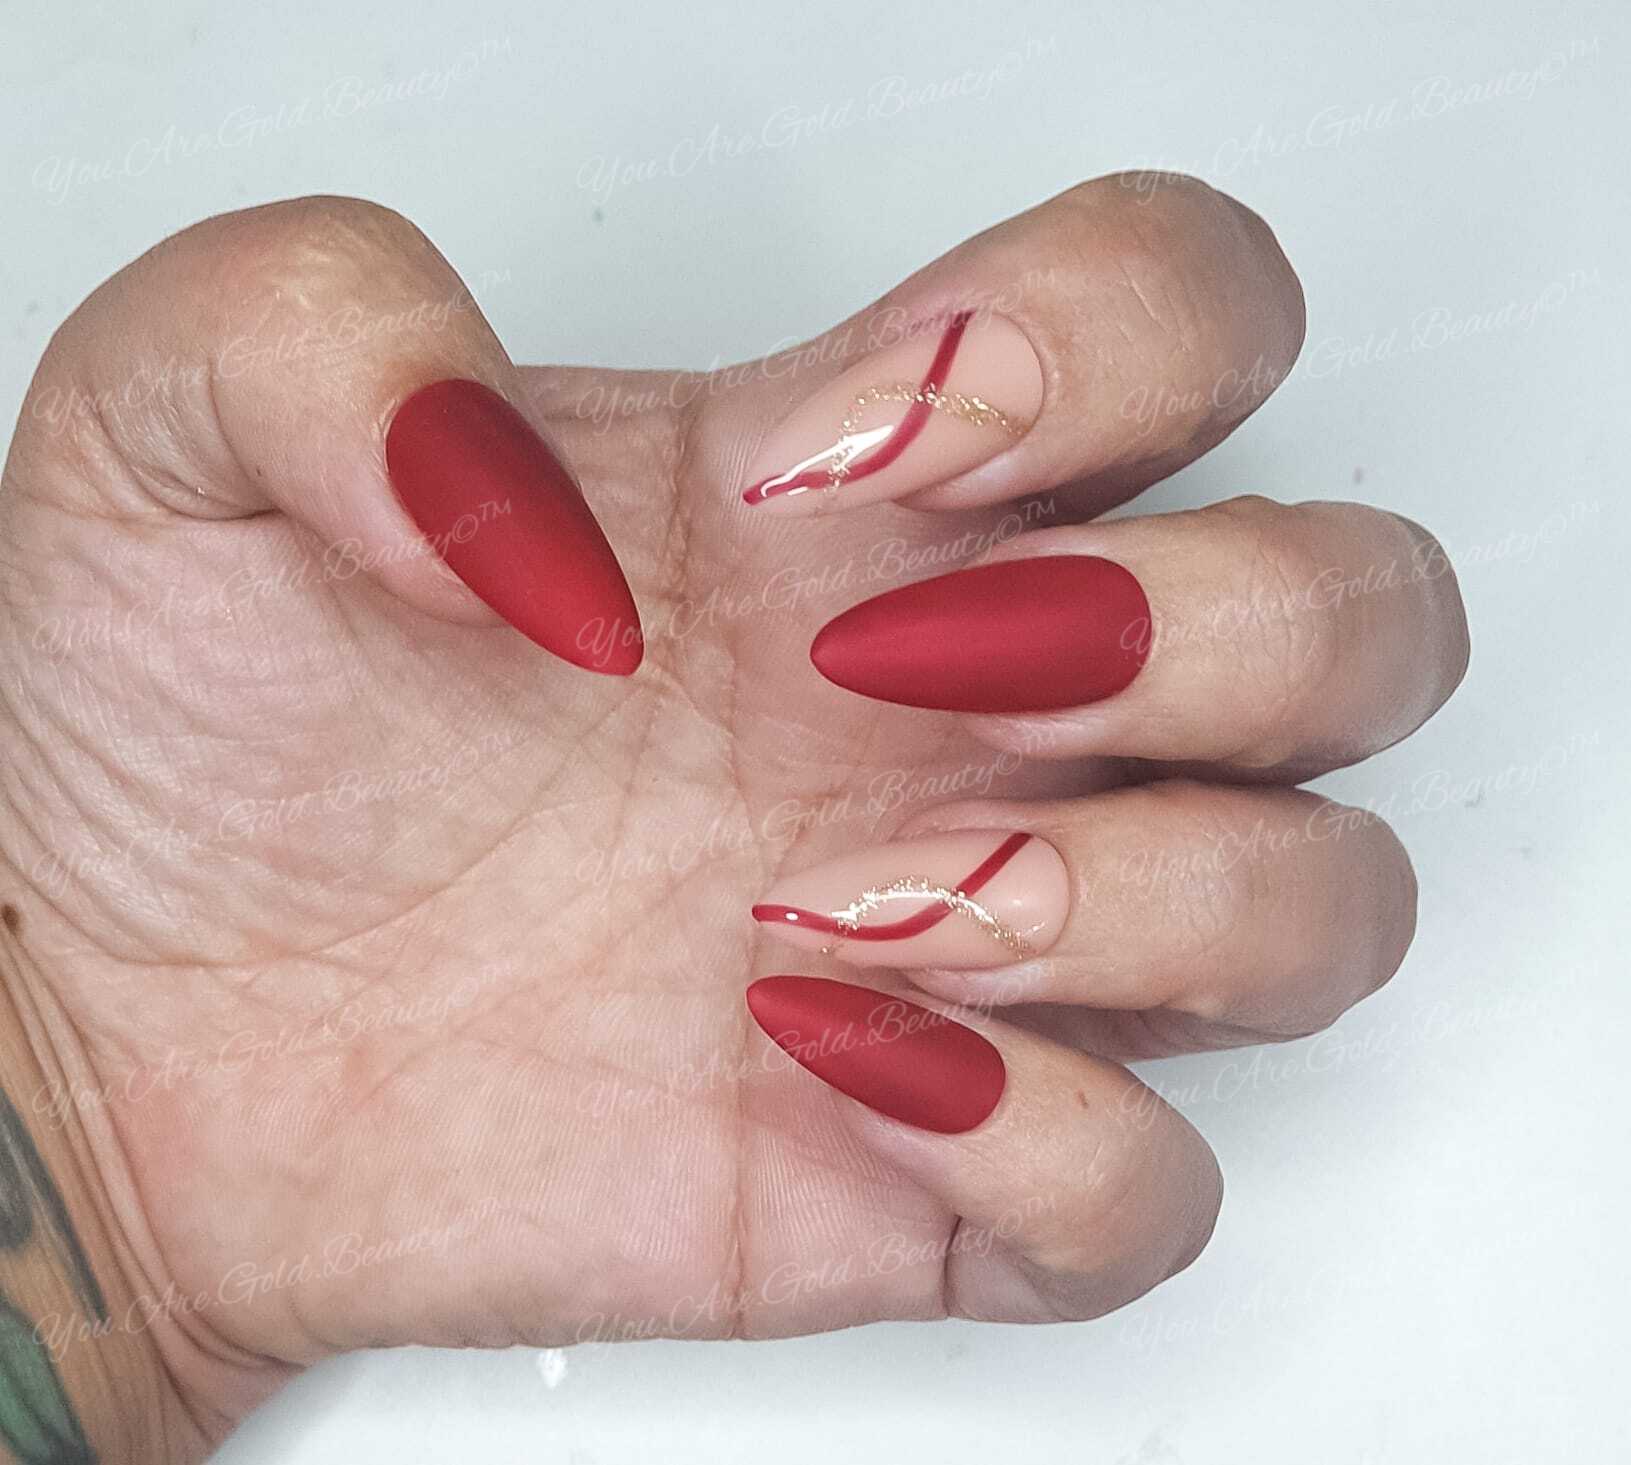 wine Red nails, almond shape nails, press on nails uk, gold and red nail designs, almond shape nails, Luxury press on nails, Rouge nails, red and gold nails, almond nails, almond shaped nails, press on nails uk, red nails, red nails designs, matte red nails, 